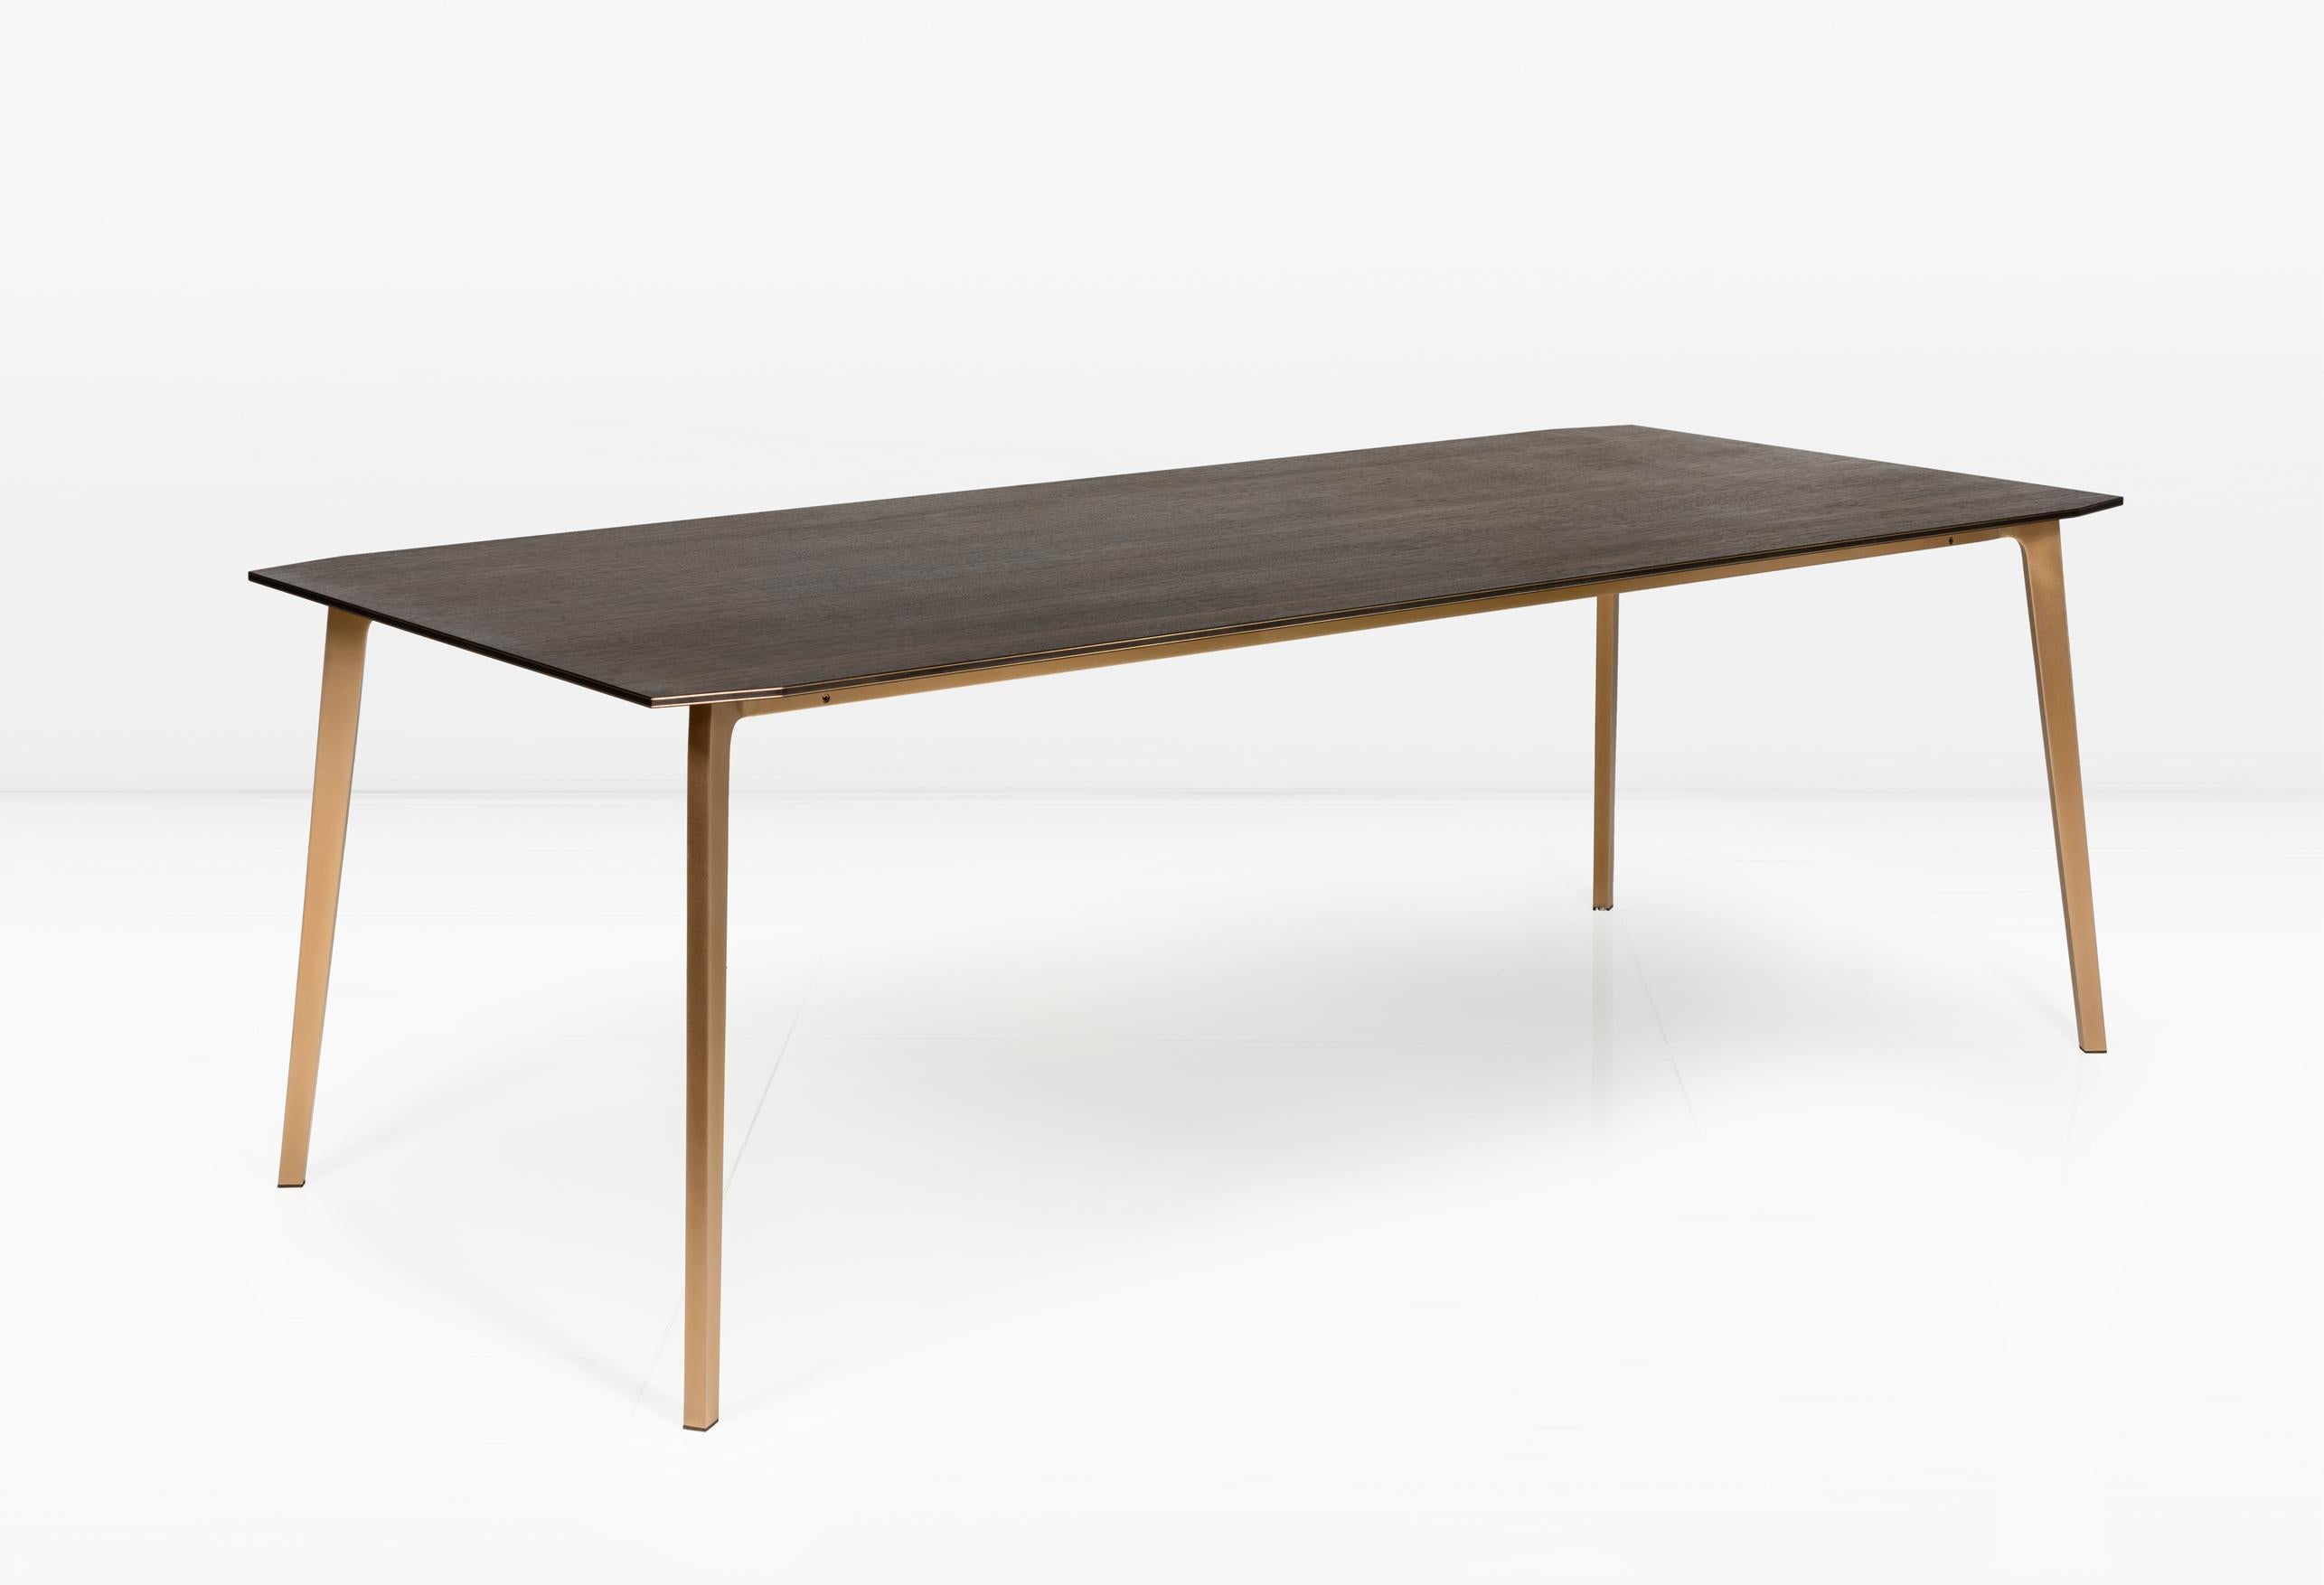 The Blackburn’s top is comprised of alternating layers of wood and metal which are expressed along the table’s edges and subtly articulated at both ends. The Blackburn makes a great dining table or desk. 

The solid metal base is shown in Silicon